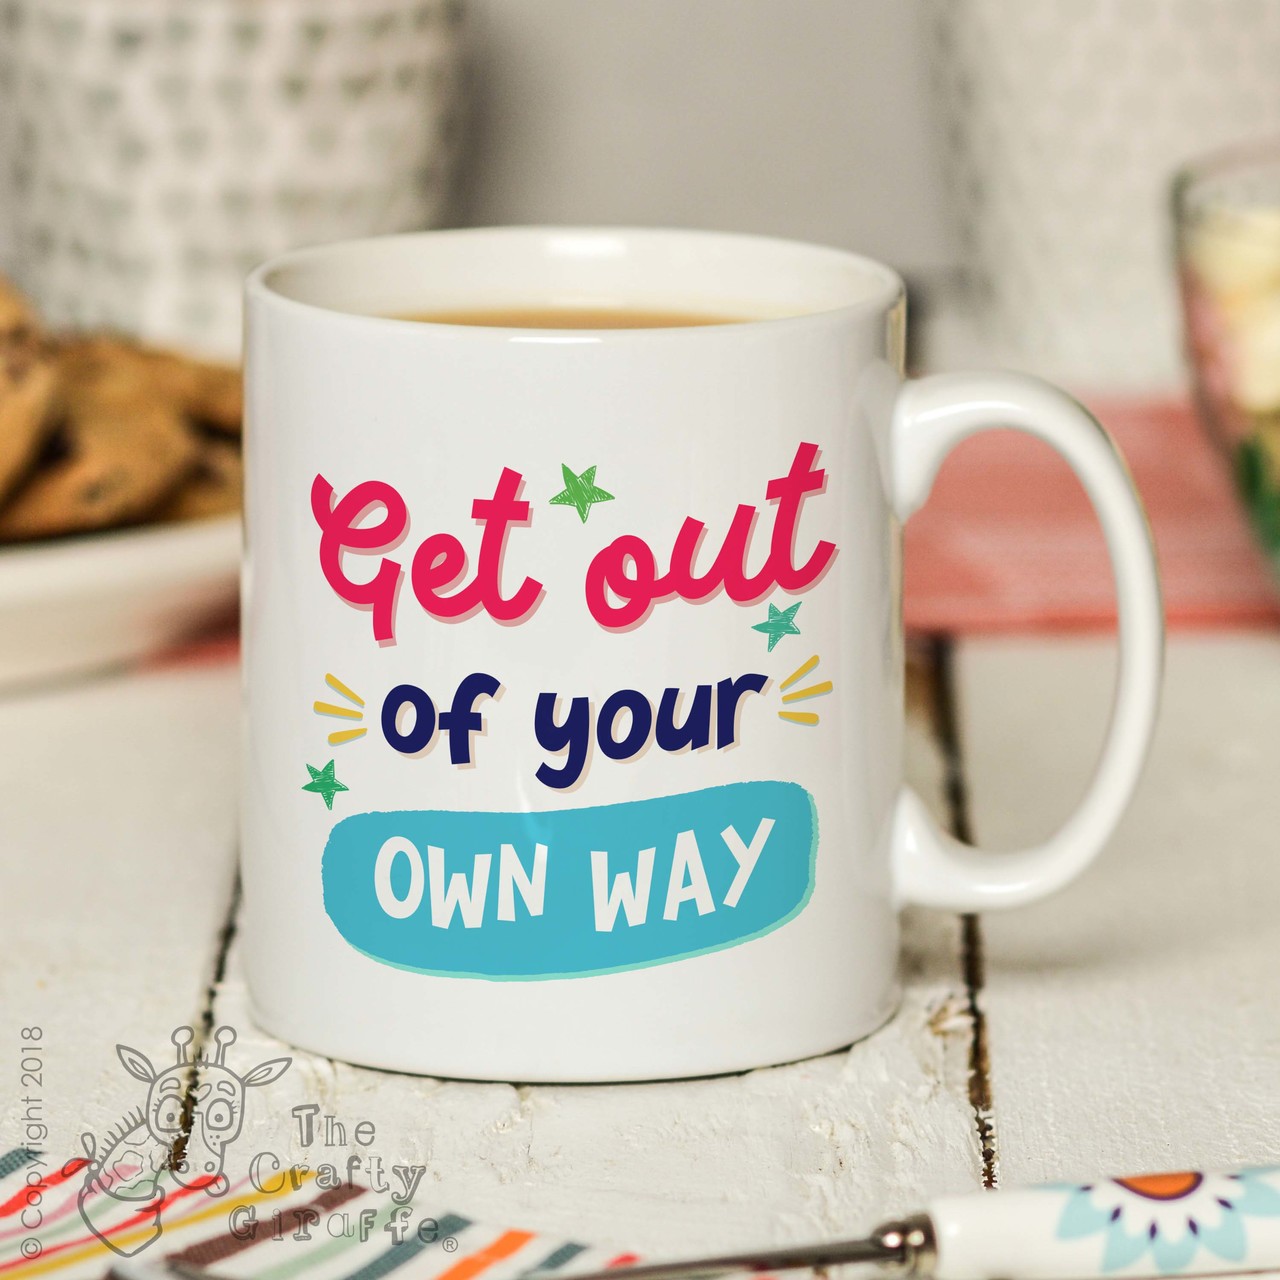 Get our of your own way Mug